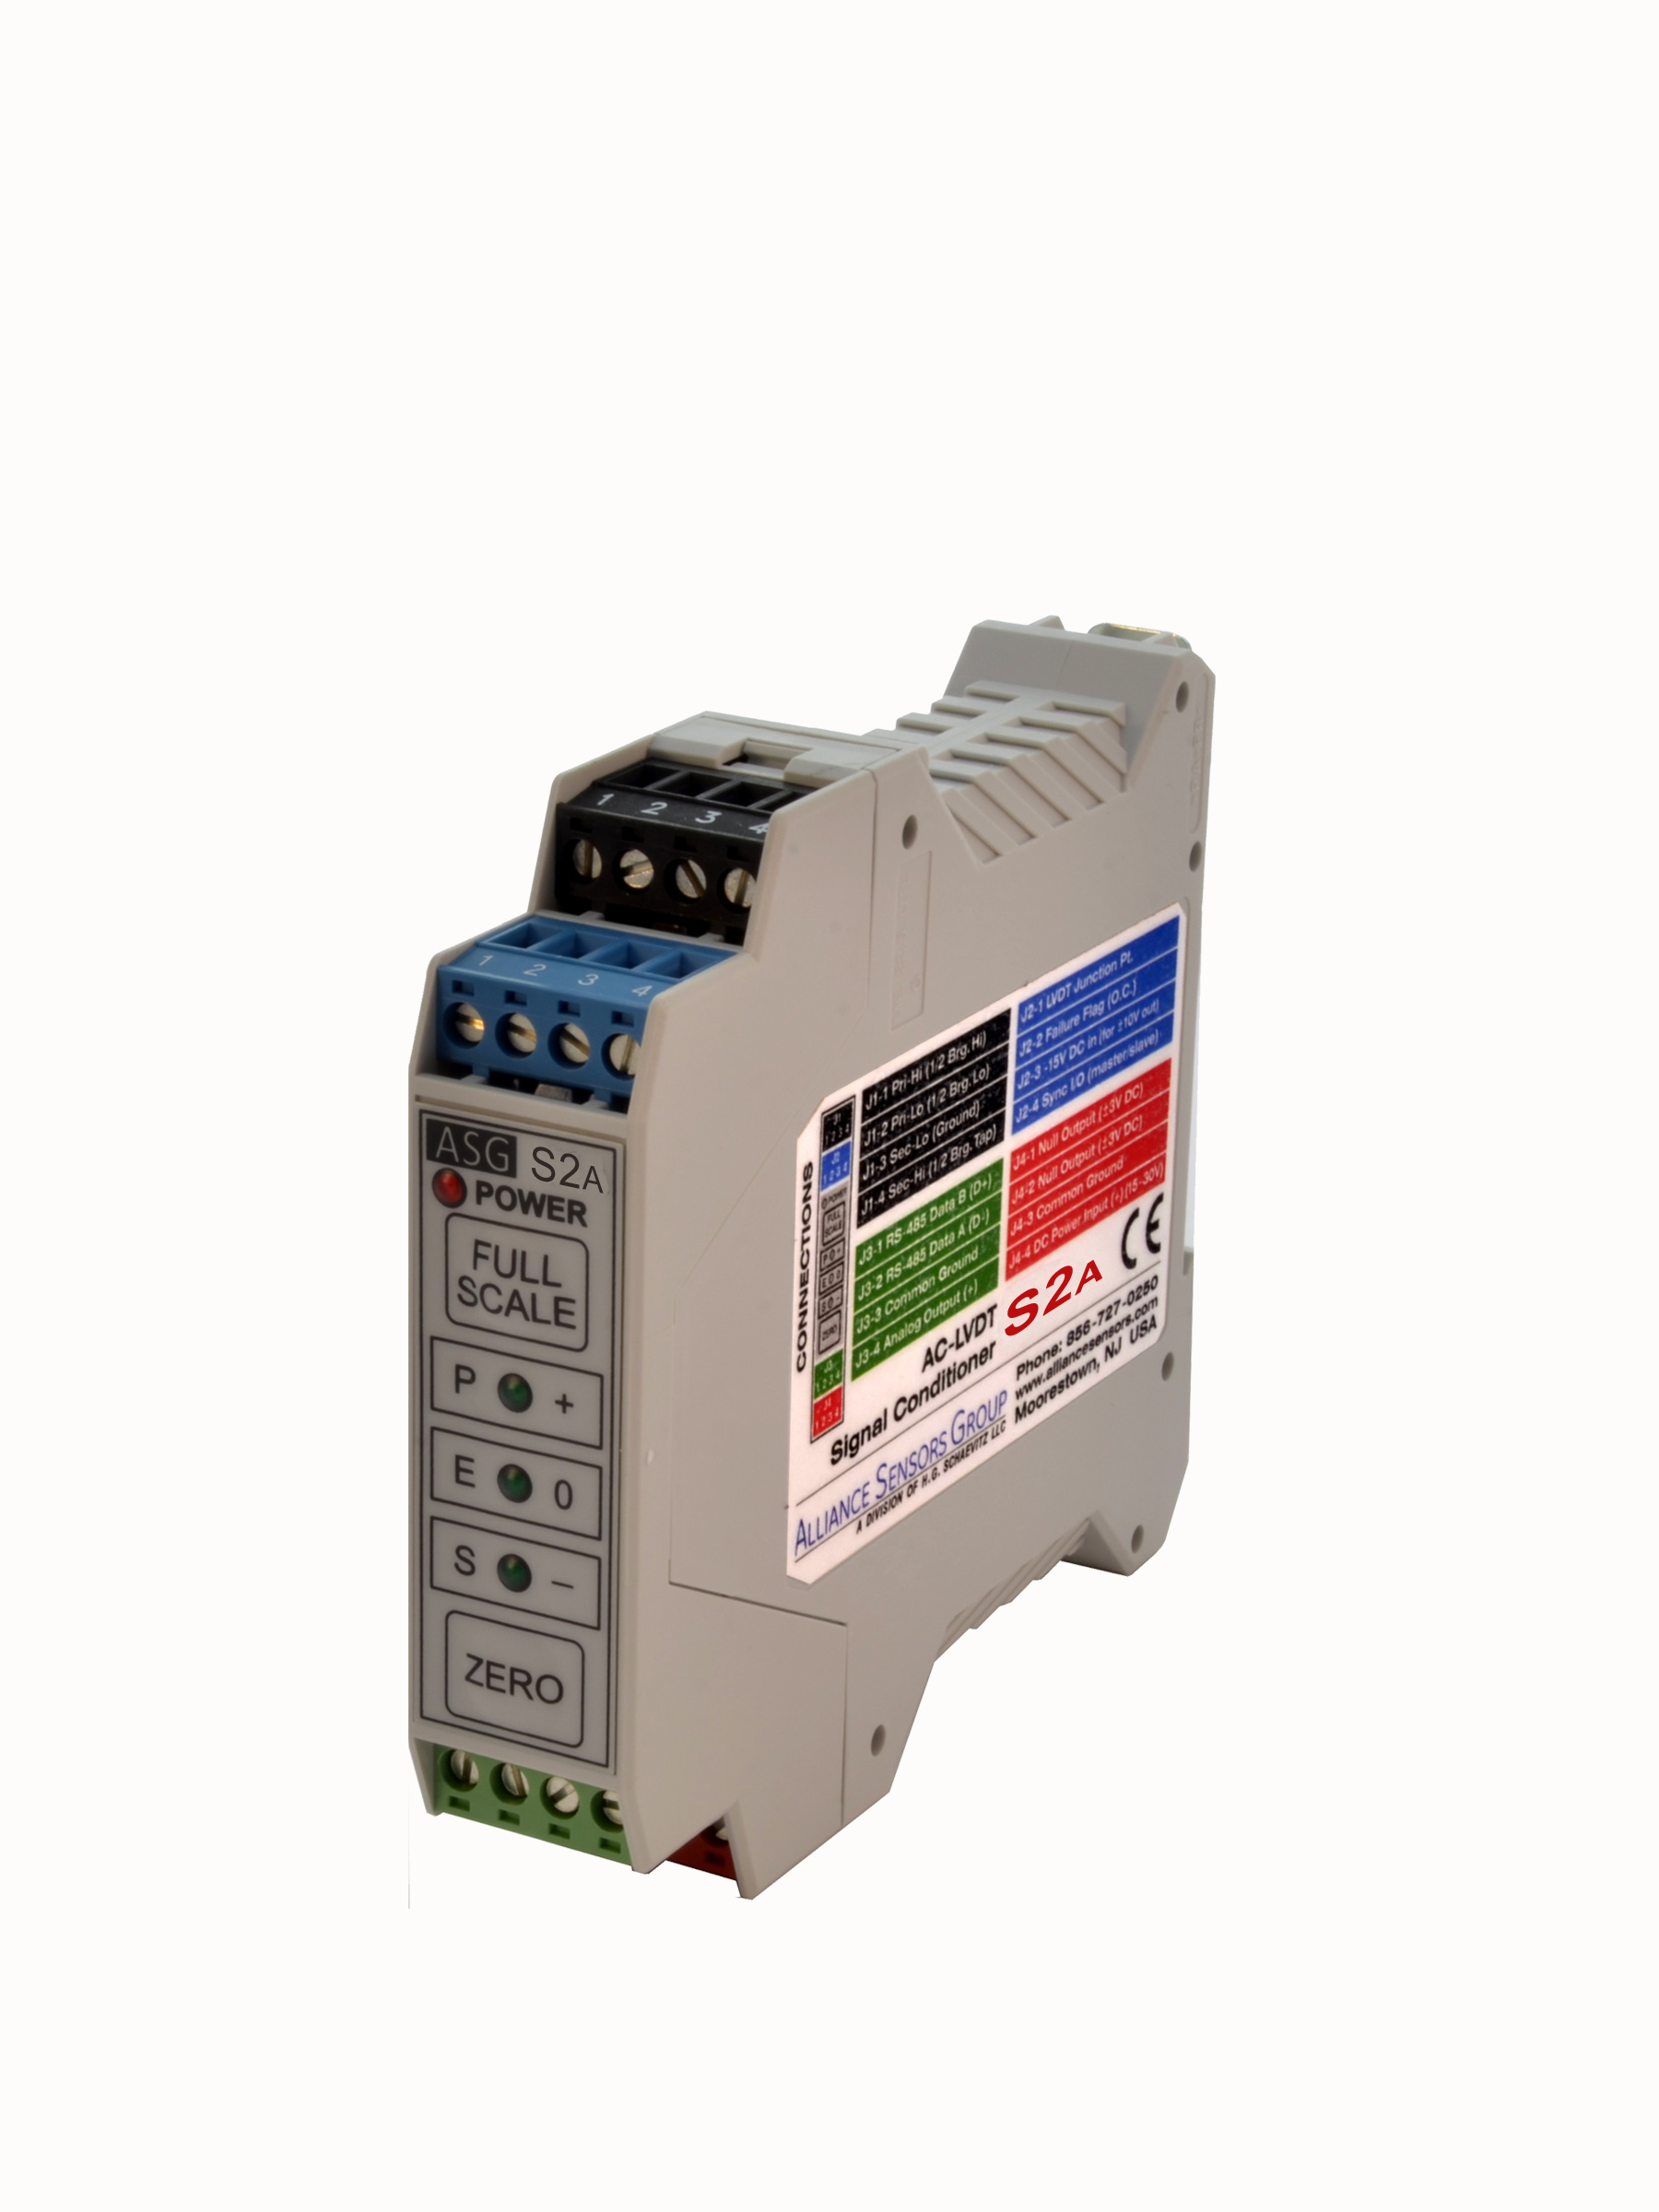 Alliance Sensors Group introduces its latest LVDT signal conditioner the S2A 